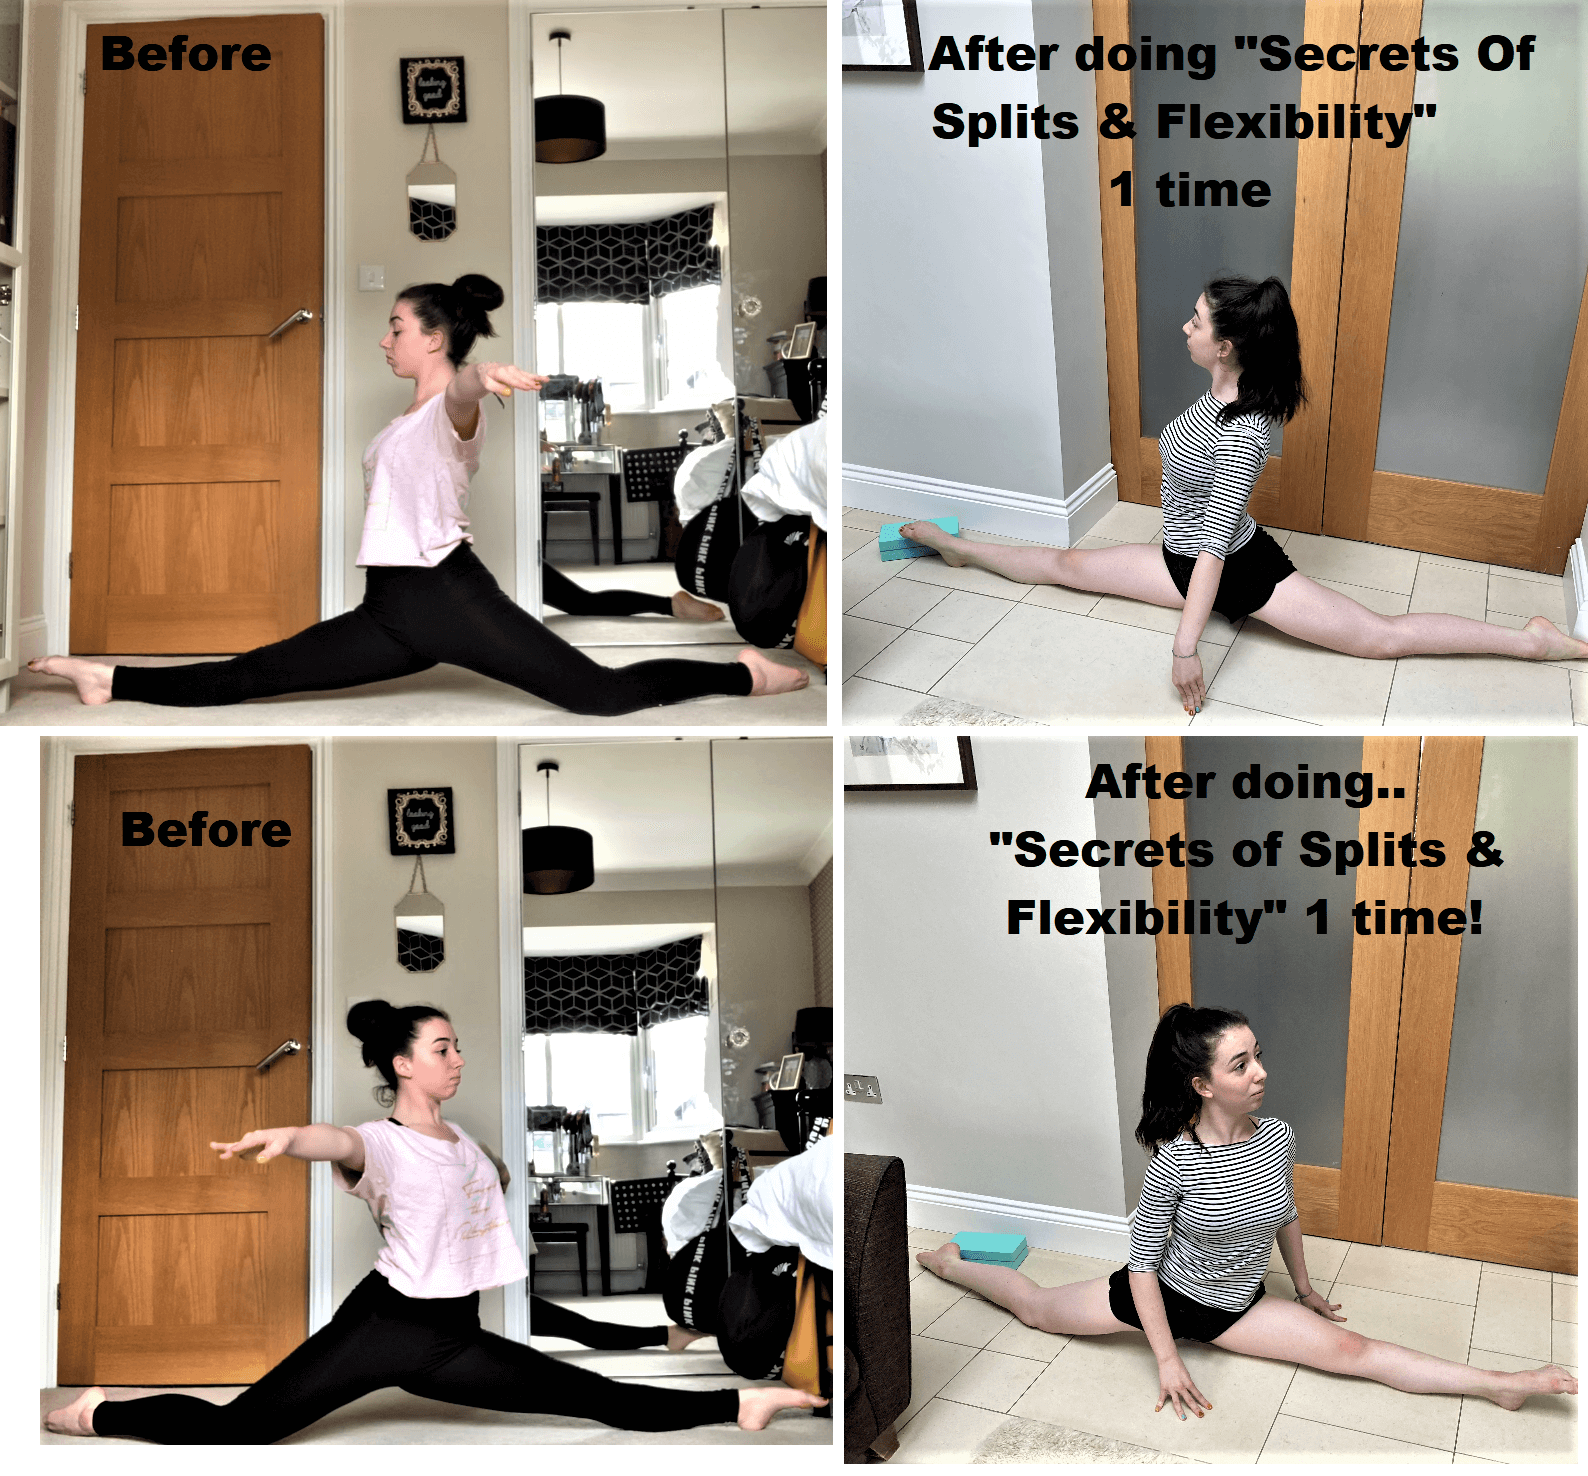 Miracle worker! I have done your "Secrets of Splits & Flexibility course after just 1 time I easily slide into the splits